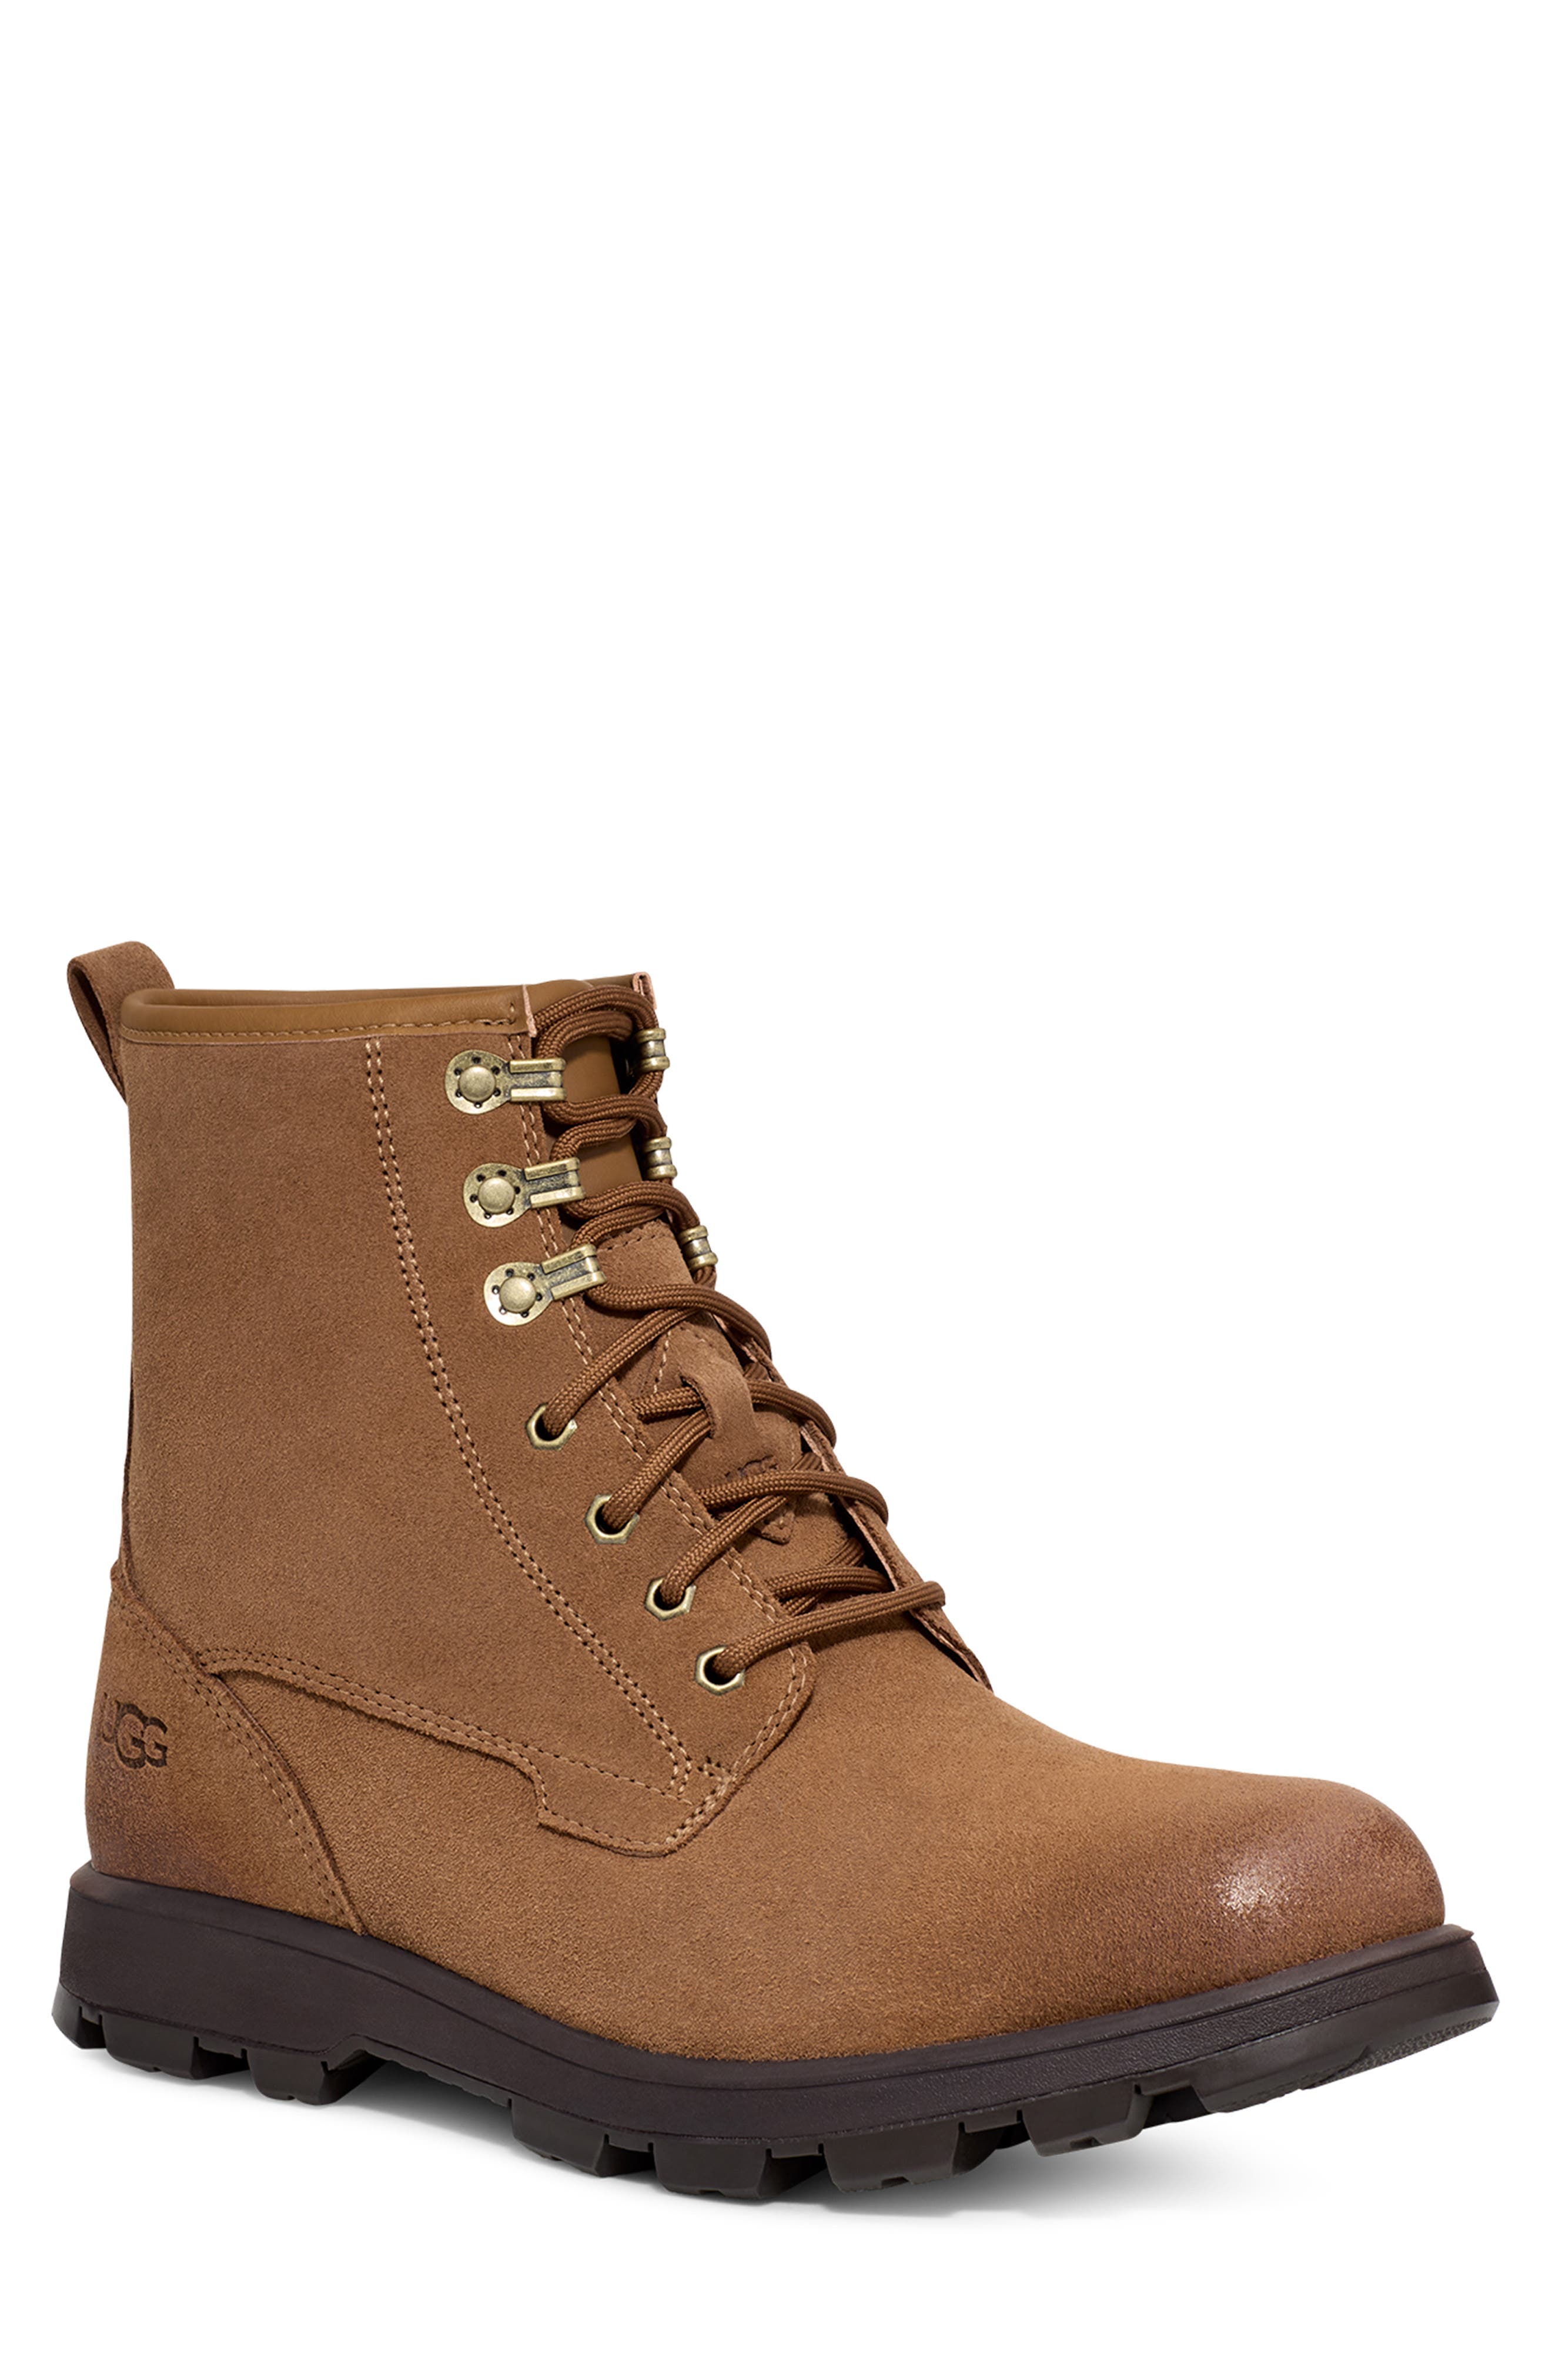 Vintage Boots- Winter Rain and Snow Boots History UGG Kirkson Waterproof Boot in Chestnut Suede at Nordstrom Rack Size 14 $79.97 AT vintagedancer.com